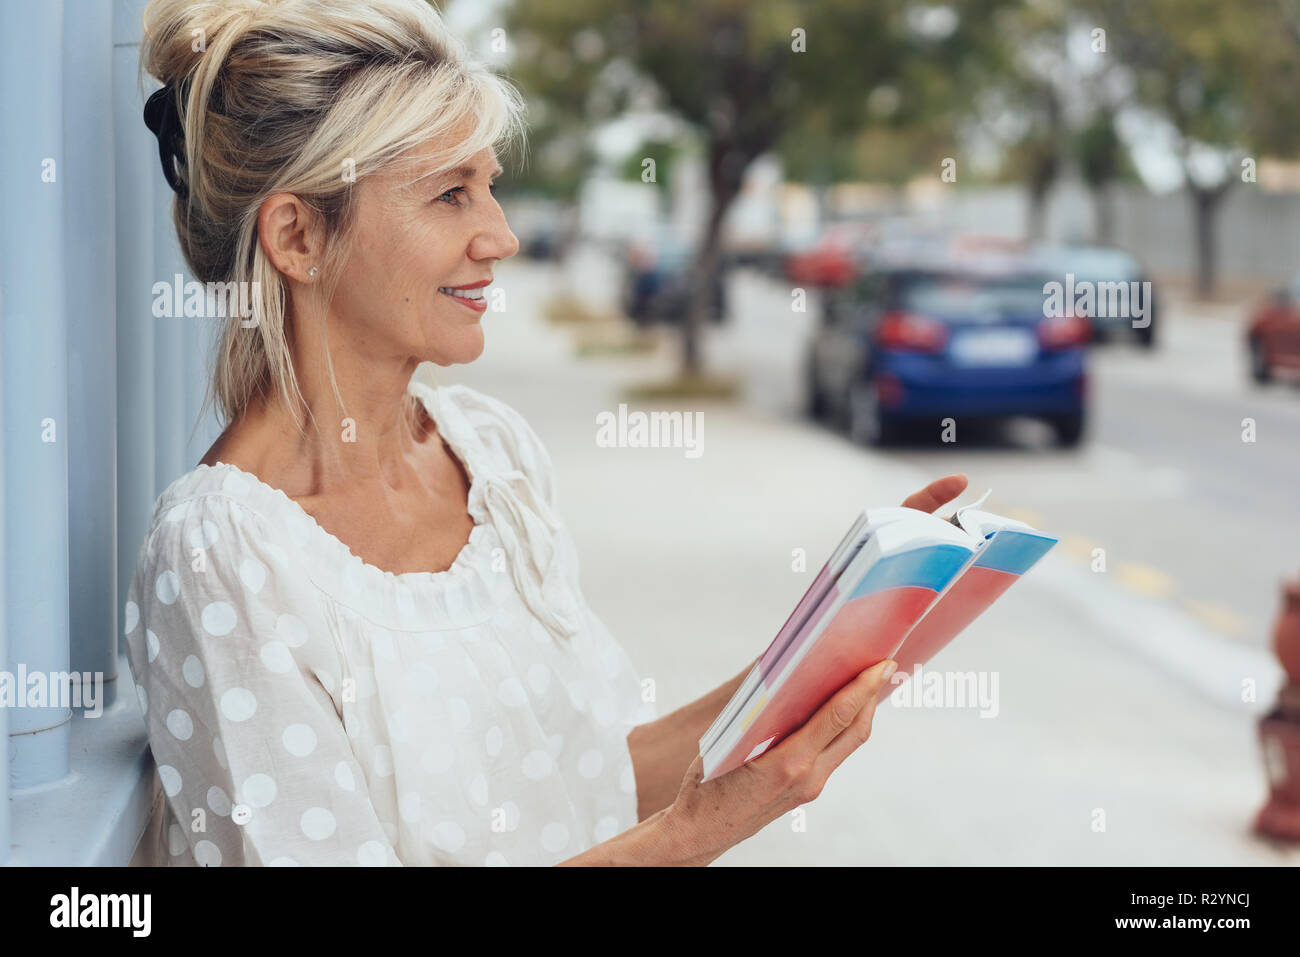 Attractive older woman sightseeing in a city standing in a street with a guide book and tablet in a close up profile view Stock Photo